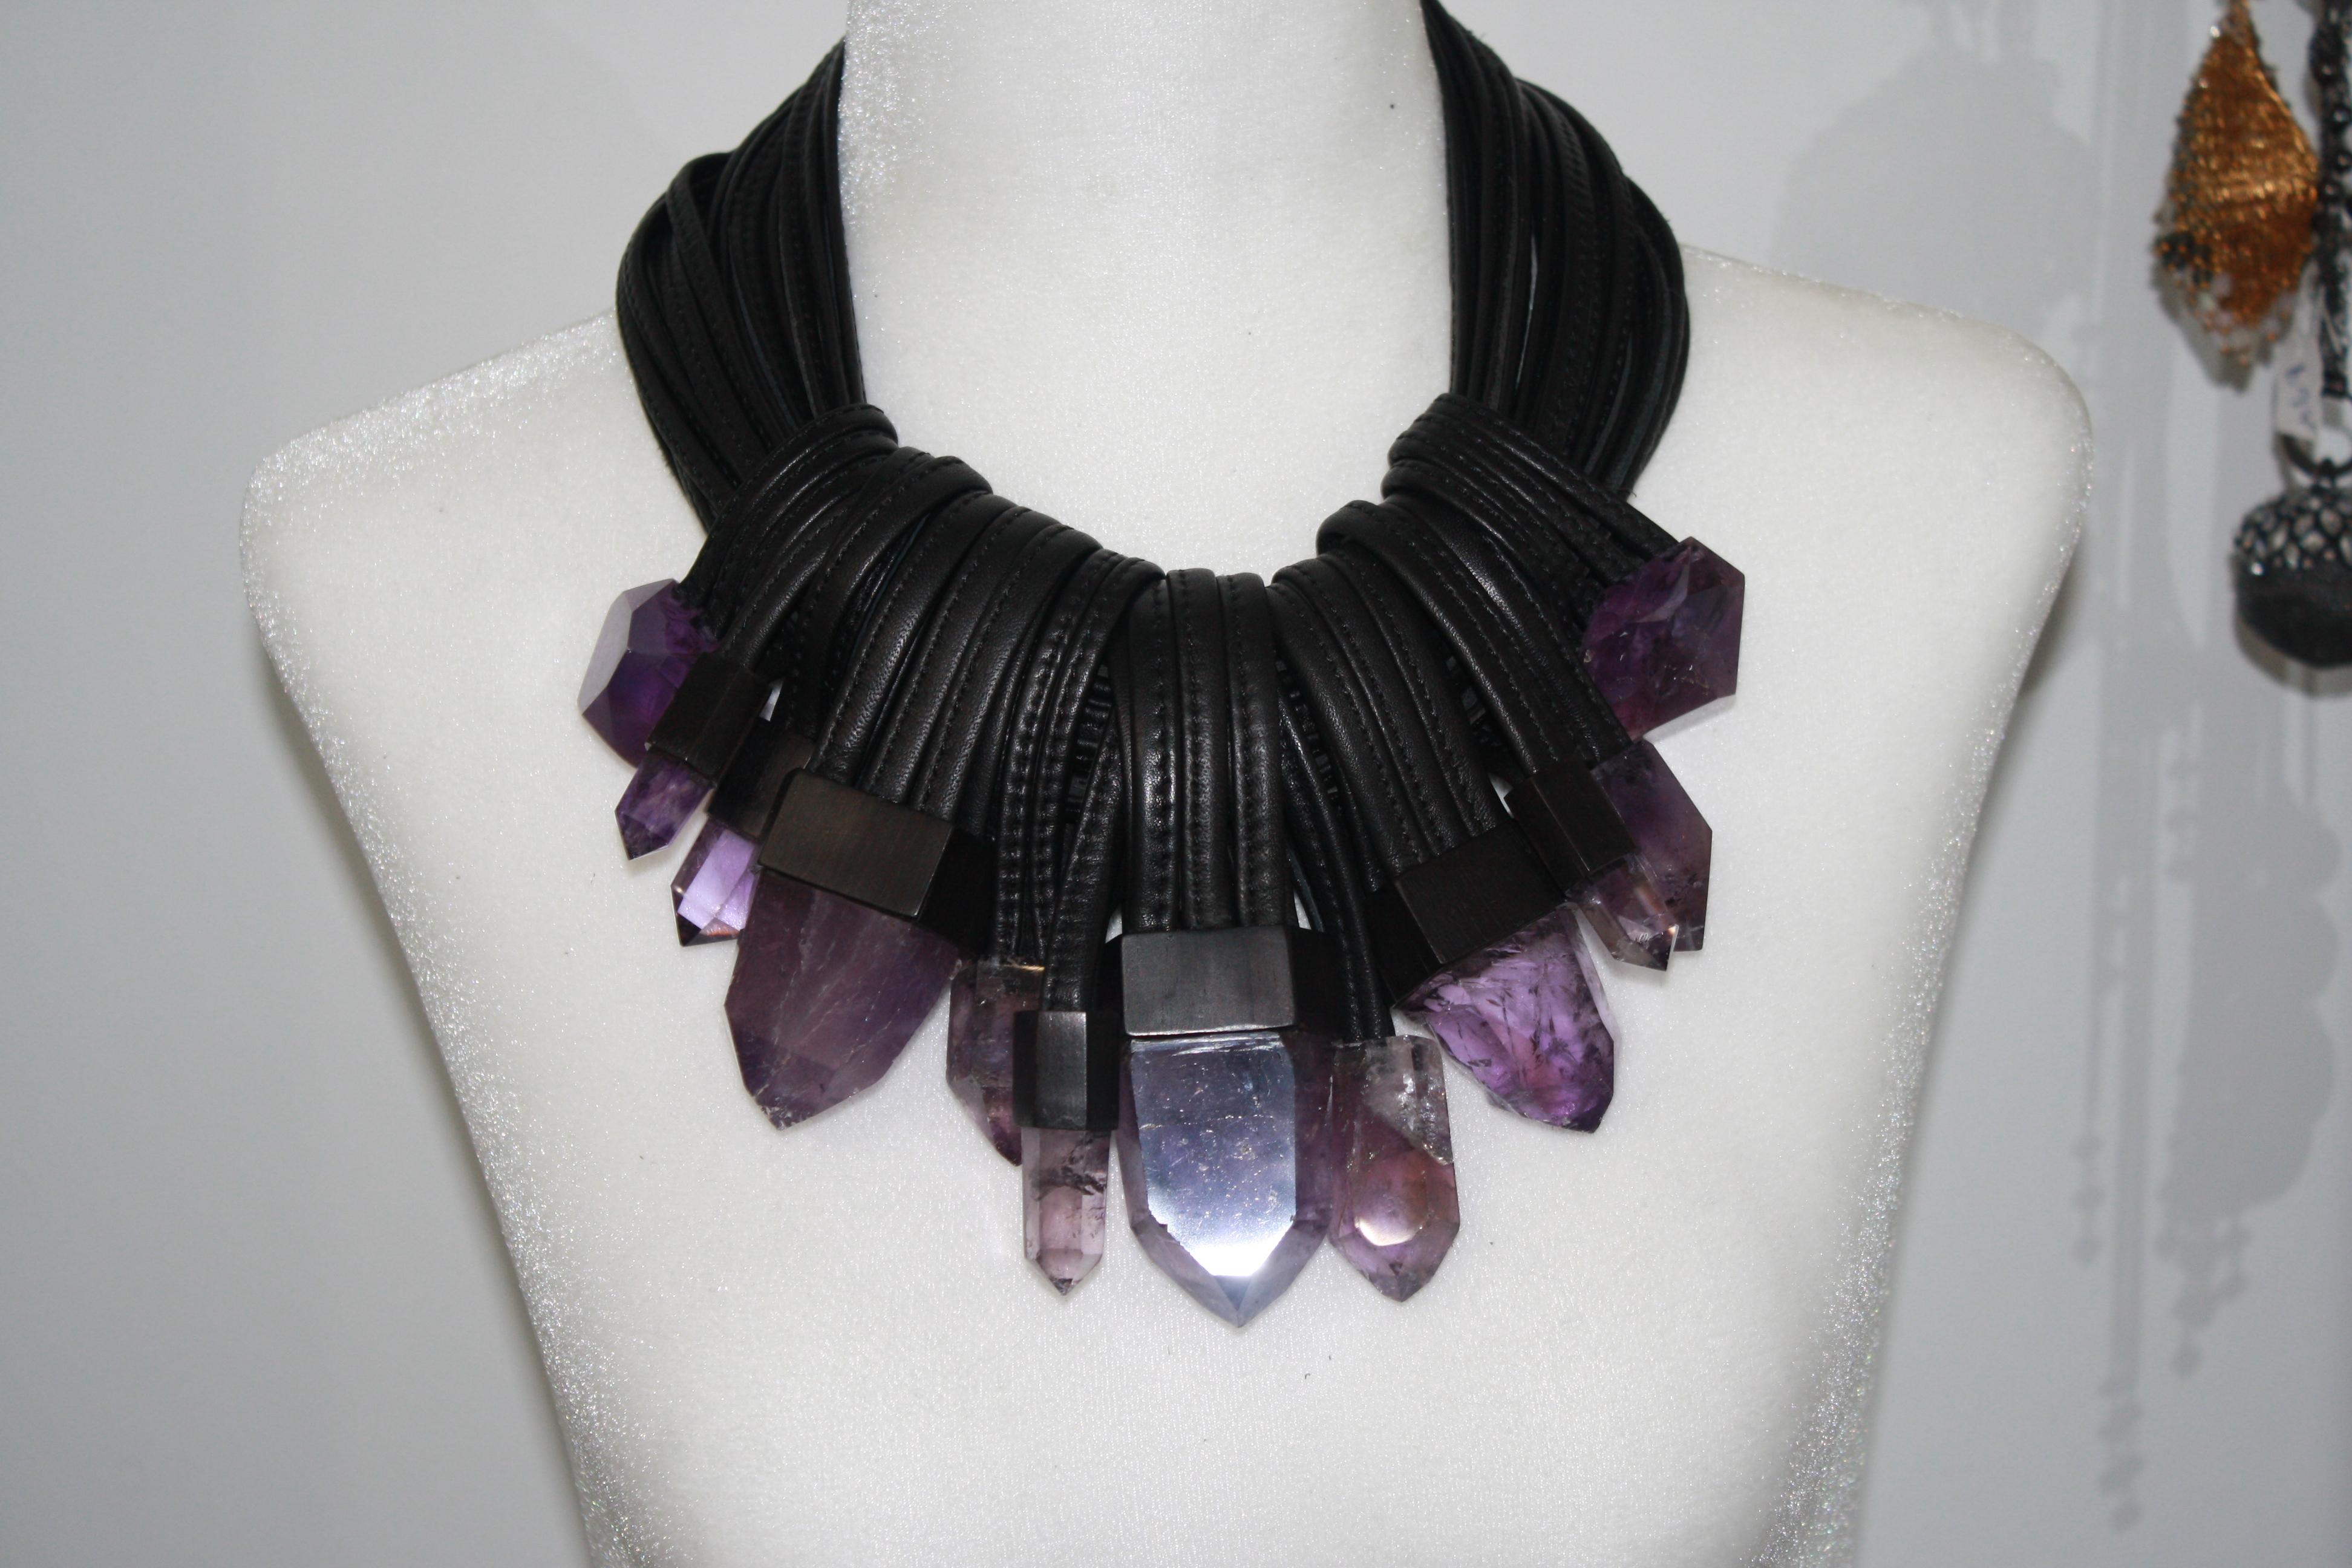 22 strands of stitched leather with  a toggle clasp lock in ebony. 12 pendants made of  octogonal shaped amethysts . This is an amazing one of a kind!